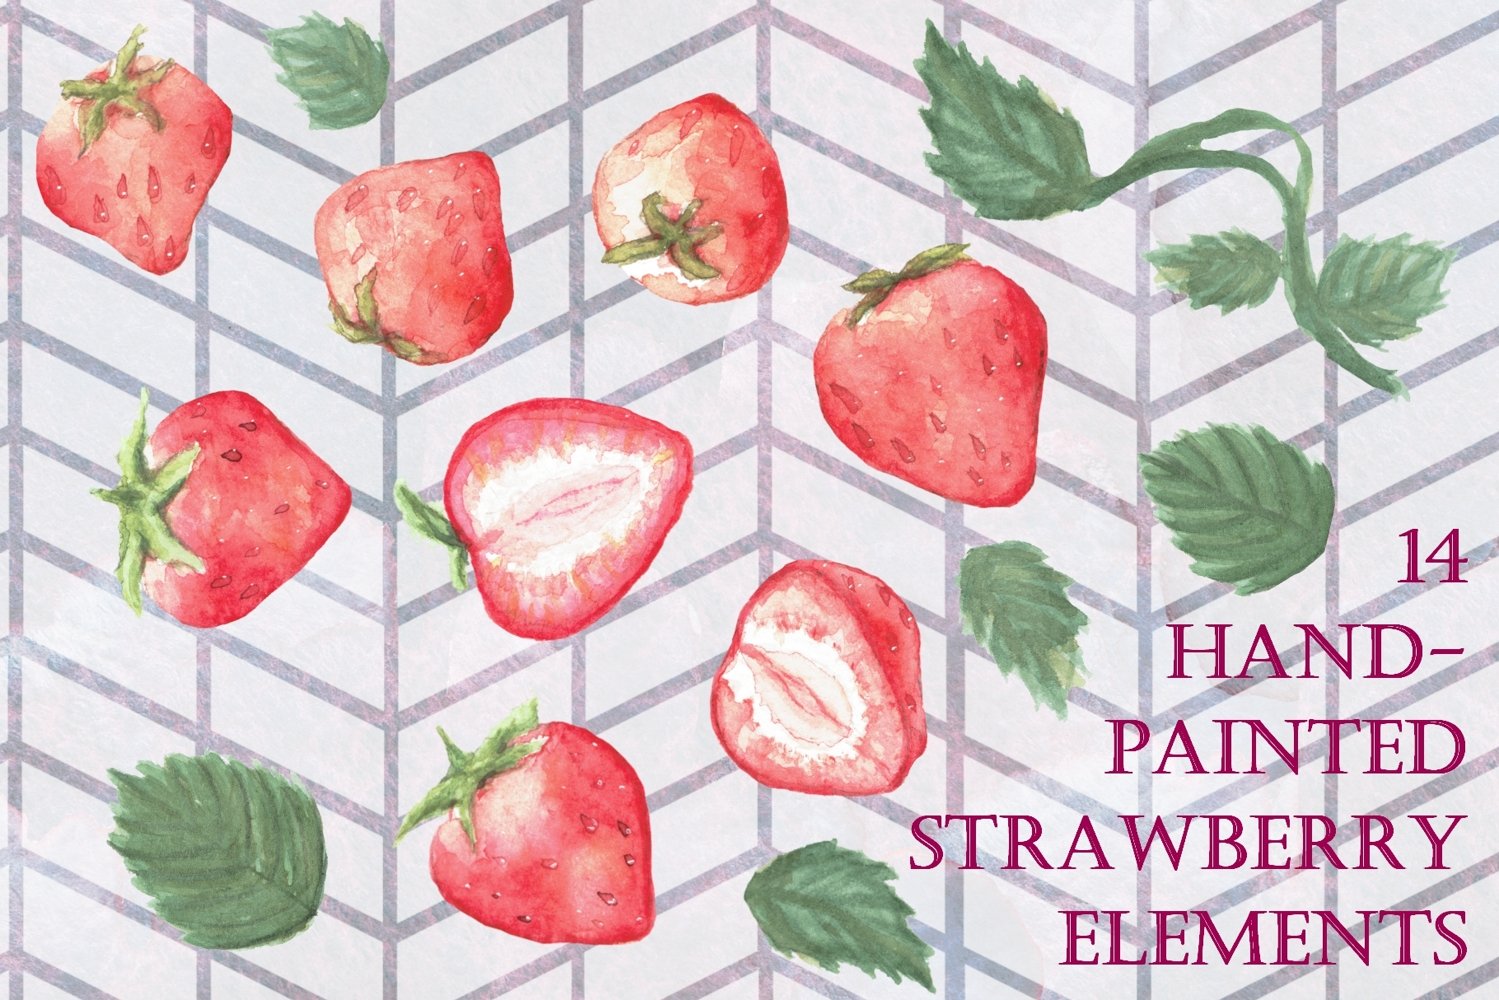 Cover image of 14 Handpainted Strawberry Elements.